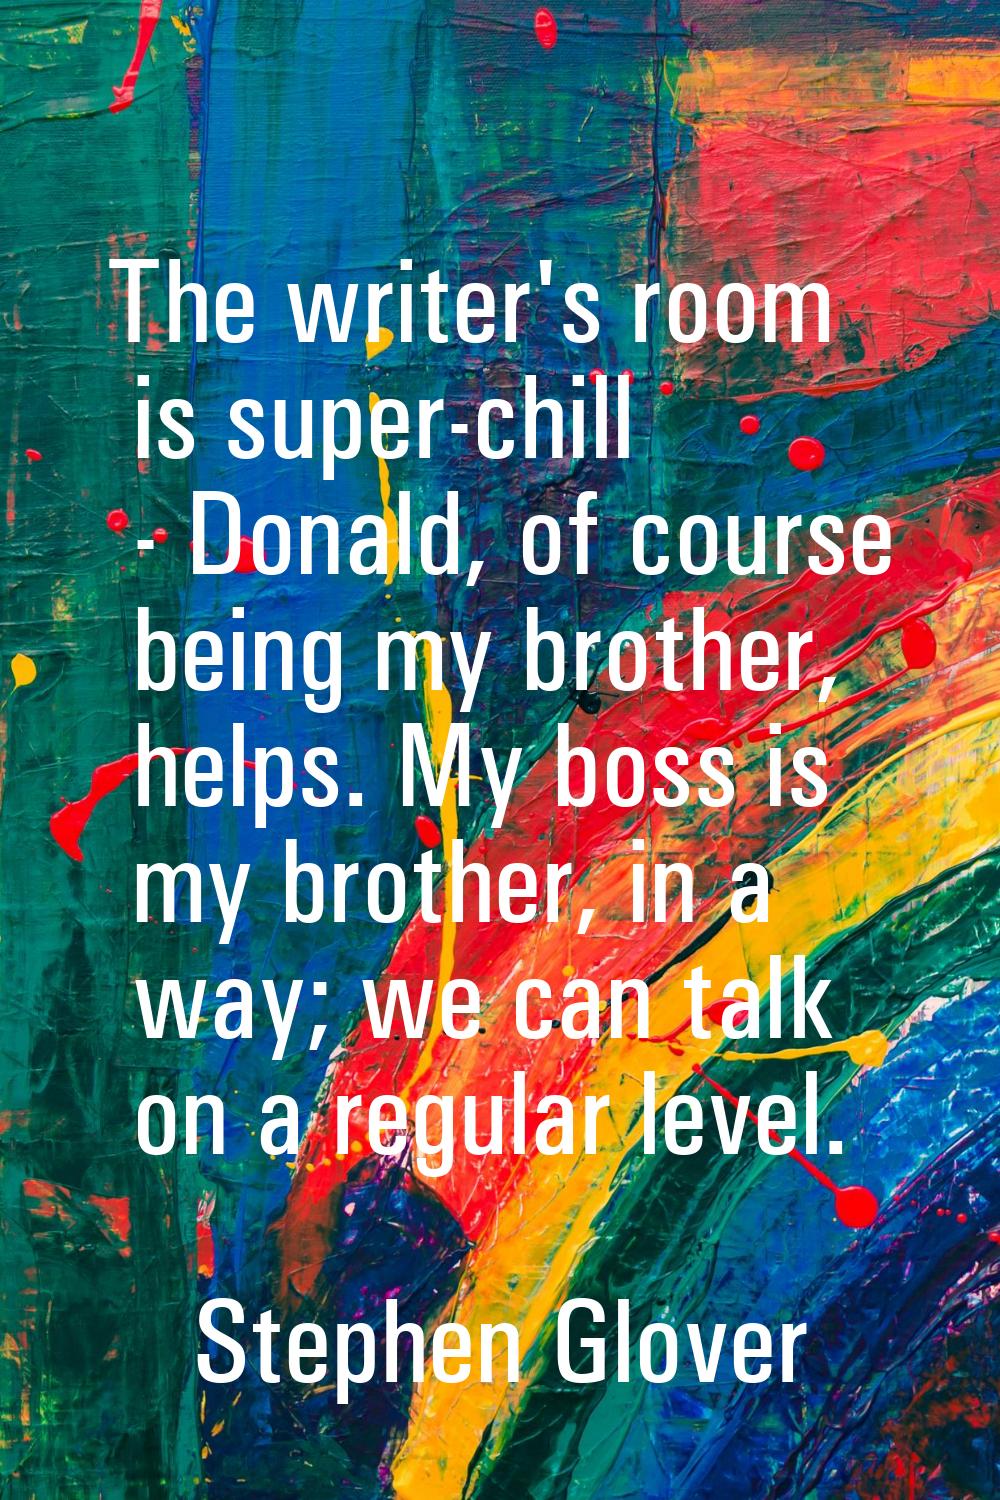 The writer's room is super-chill - Donald, of course being my brother, helps. My boss is my brother